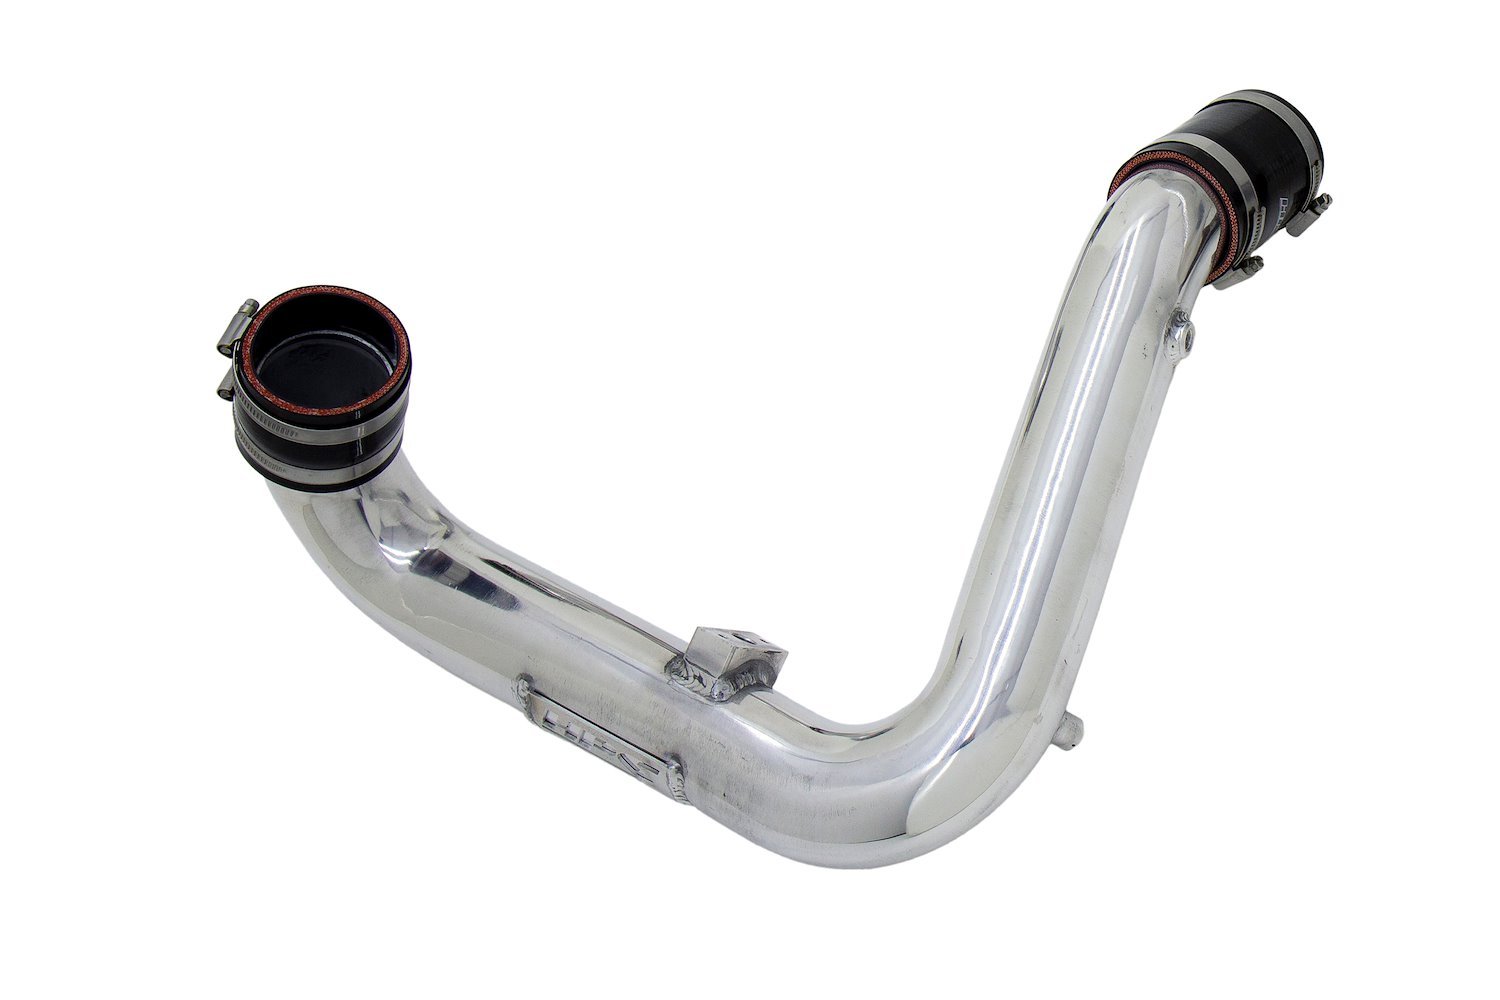 17-129P Turbo Charge Pipe Kit, Prevent Boost Leaks, Increase HP & TQ, Improve Throttle Response